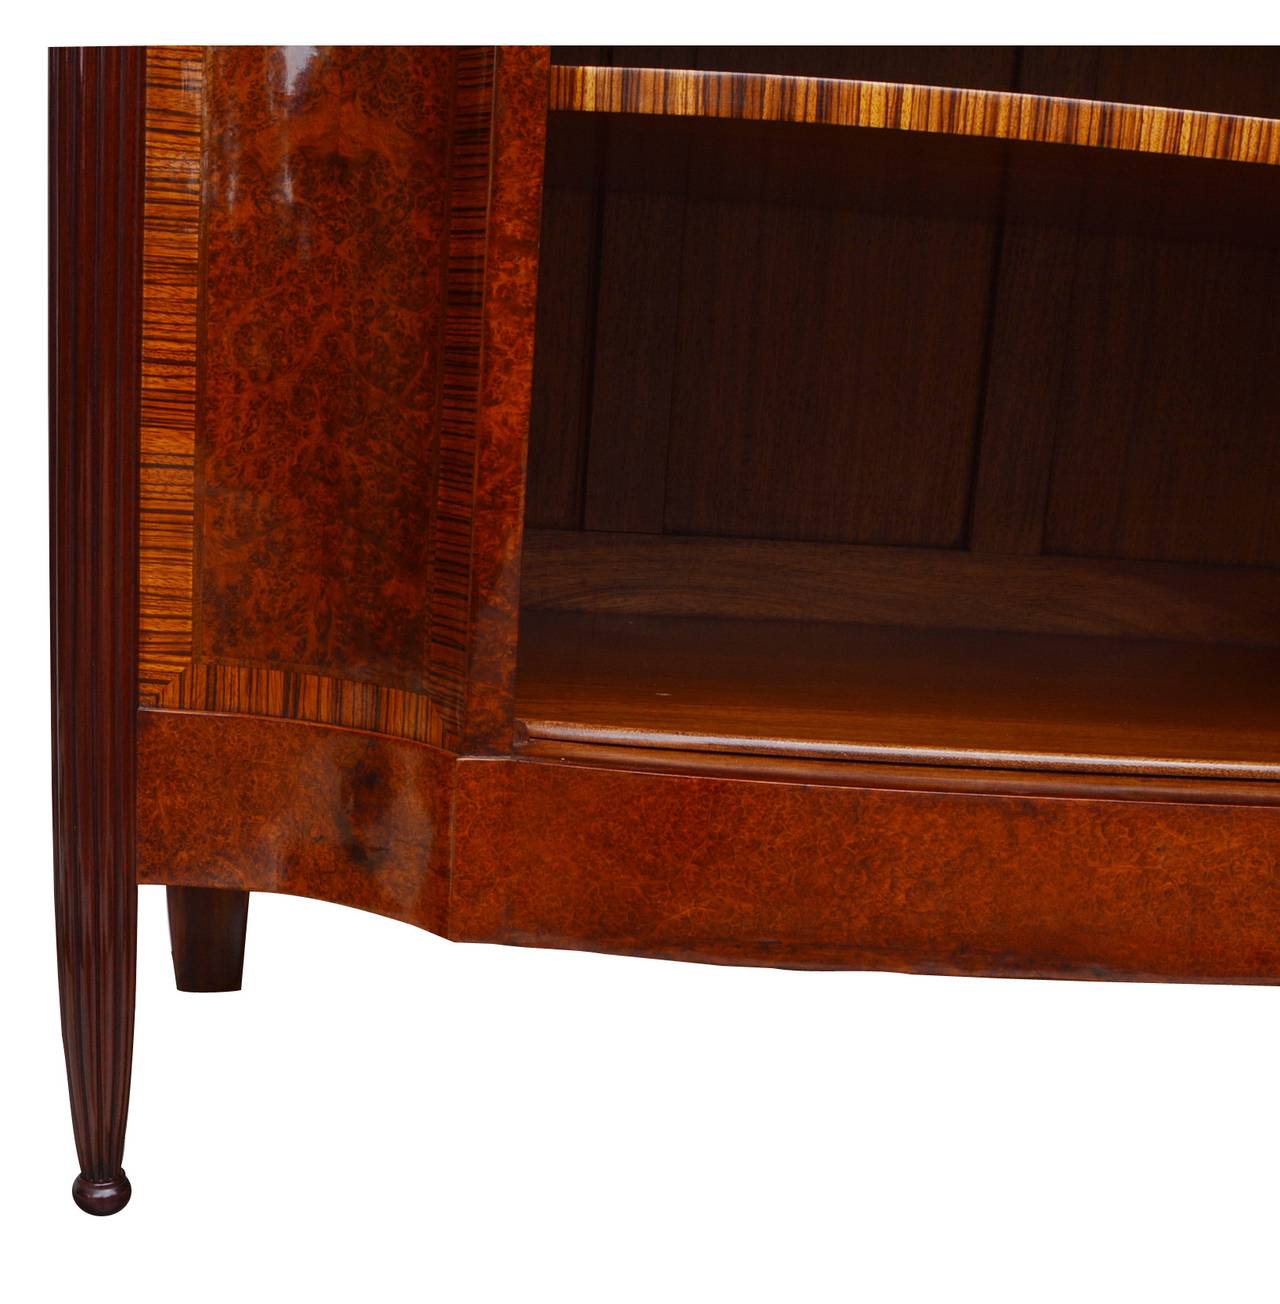 Art Déco Period Sideboard Attributed to Paul Follot, Paris 1920s For Sale 1